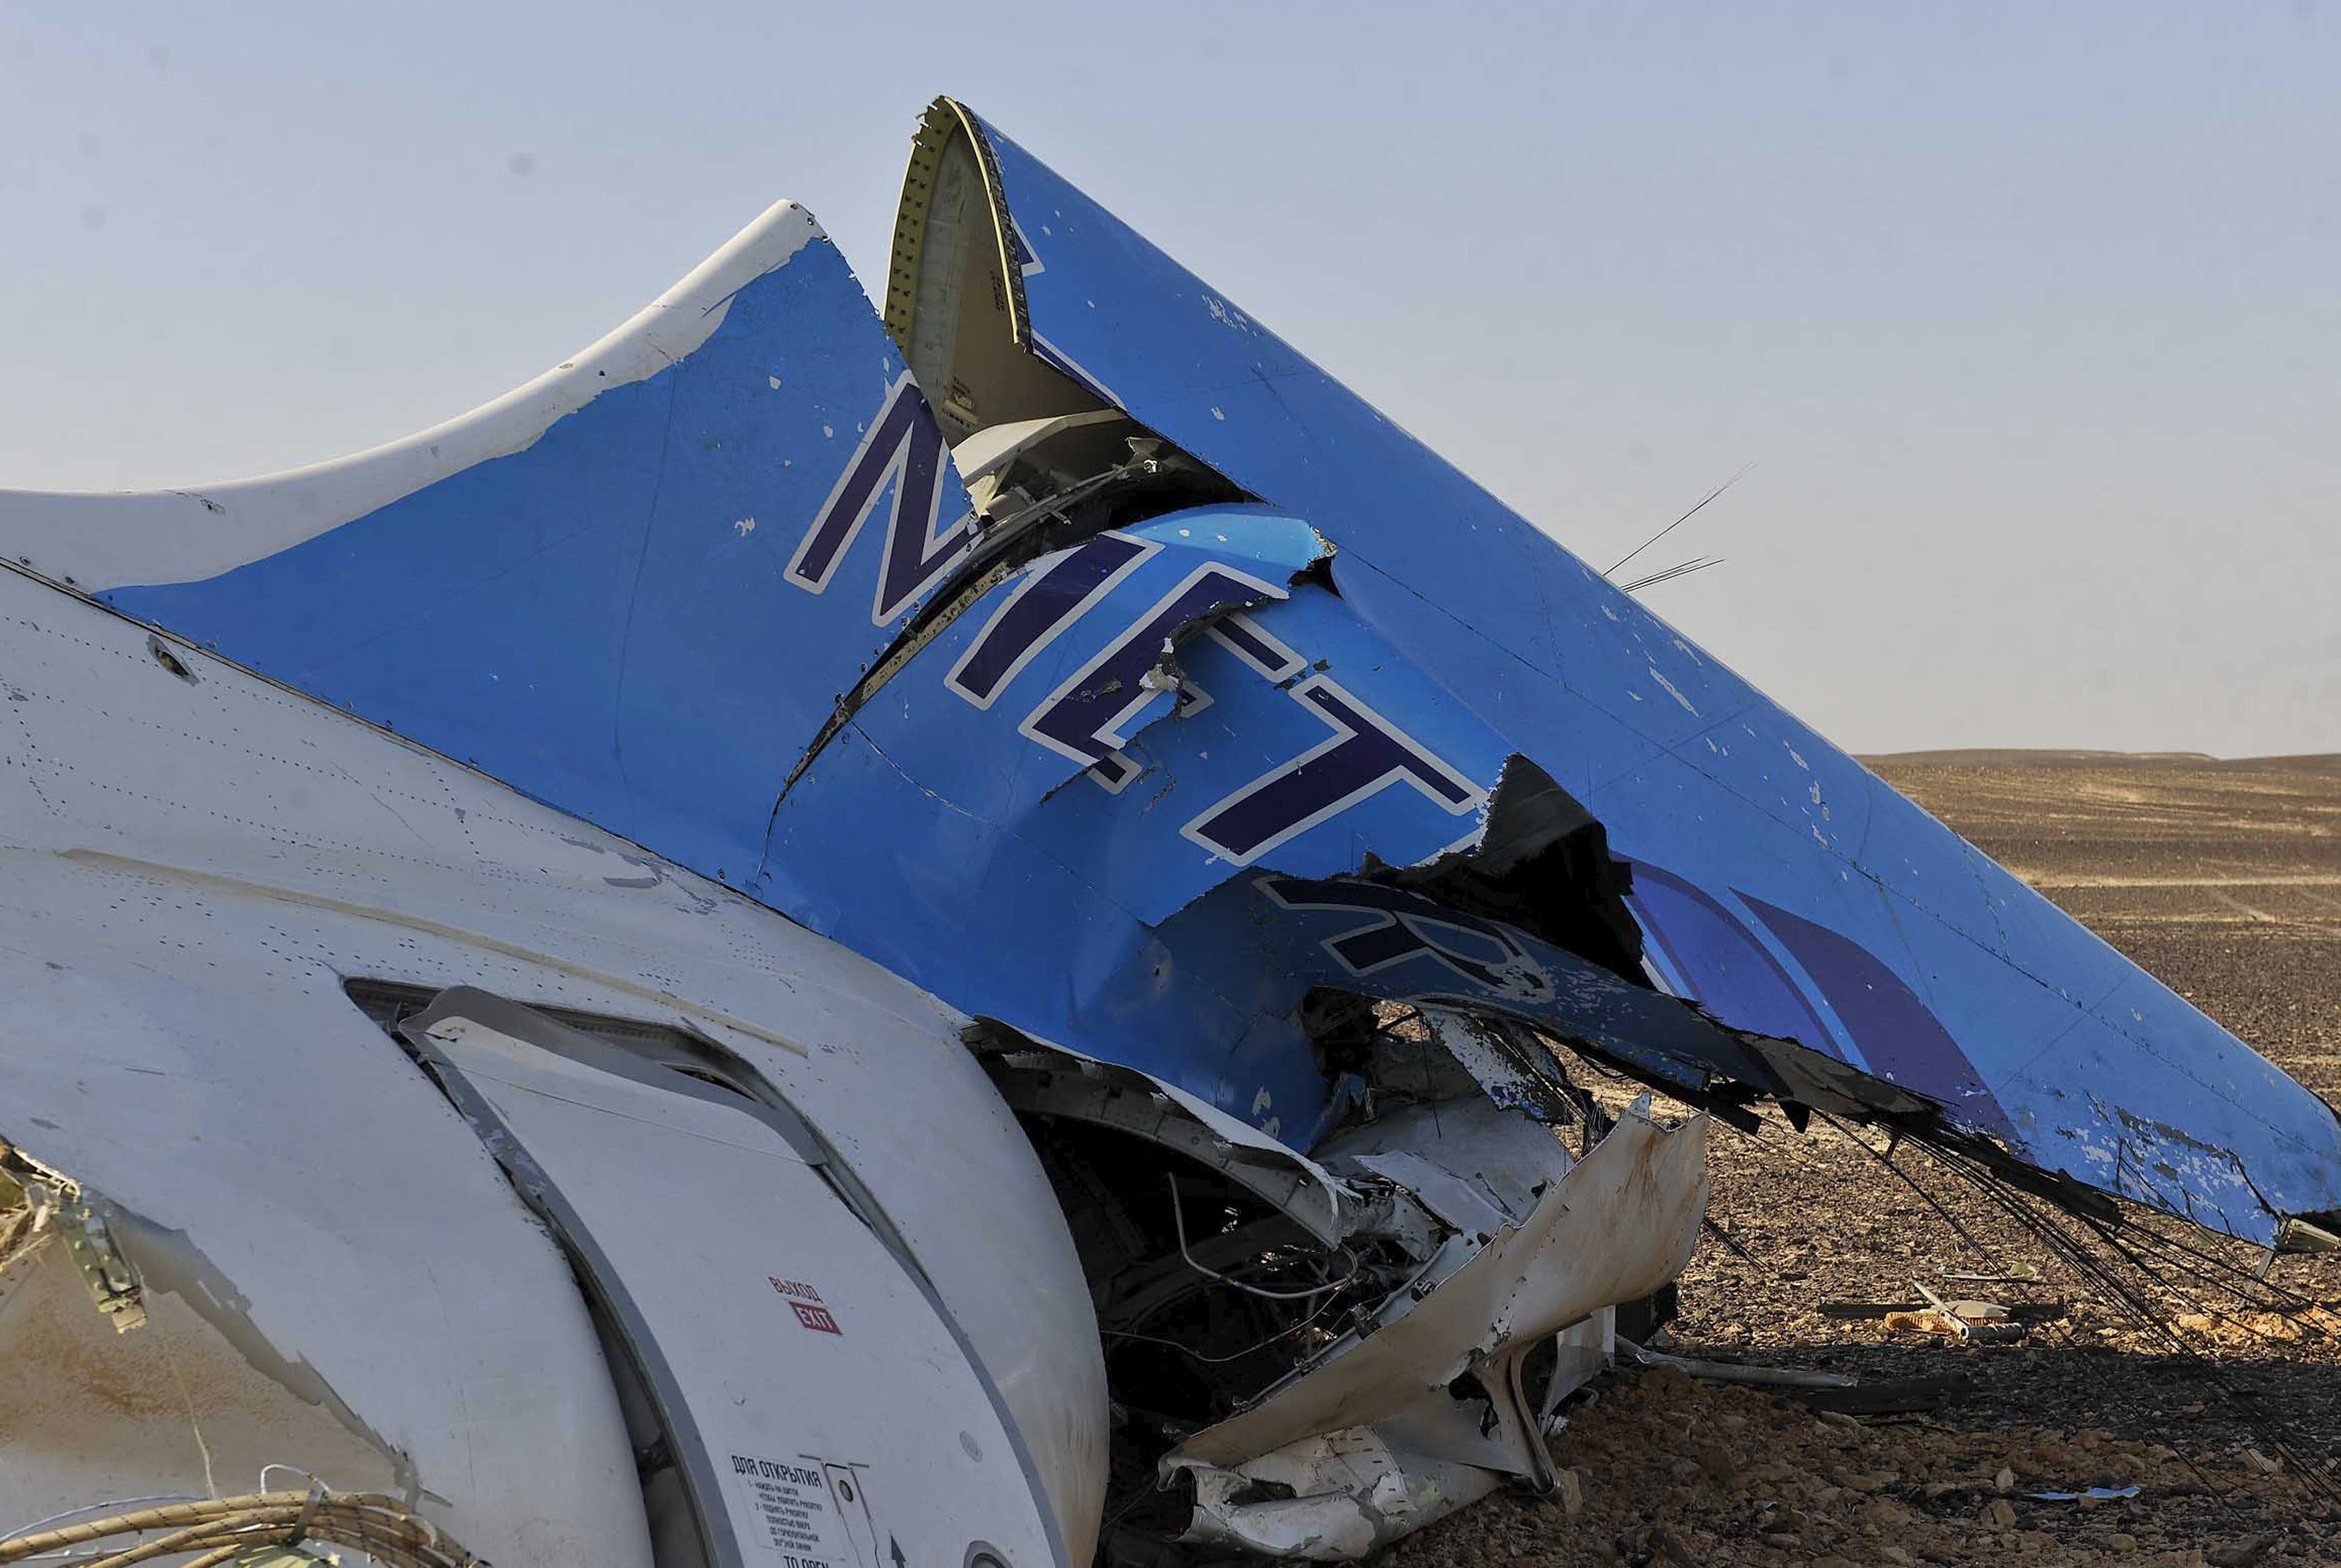 The remains of a Russian airliner which crashed is seen in central Sinai near El Arish city, north Egypt, October 31, 2015. The Airbus A321, operated by Russian airline Kogalymavia under the brand name Metrojet, carrying 224 passengers crashed into a mountainous area of Egypt's Sinai peninsula on Saturday shortly after losing radar contact near cruising altitude, killing all aboard. REUTERS/Stringer TPX IMAGES OF THE DAY